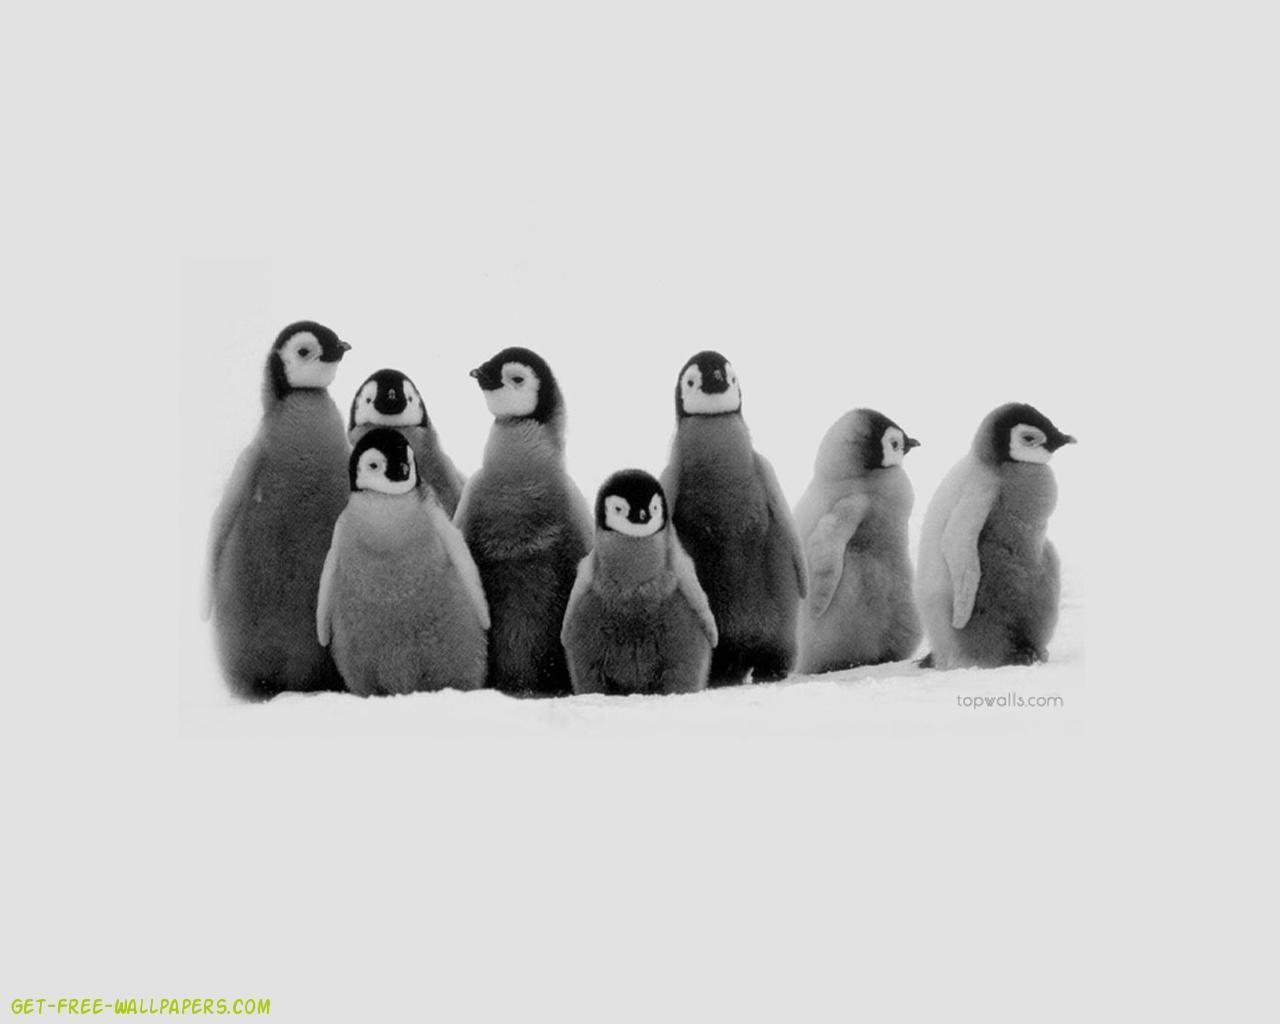 Baby Penguin Wallpaper Phone with High Resolution Wallpaper Cute